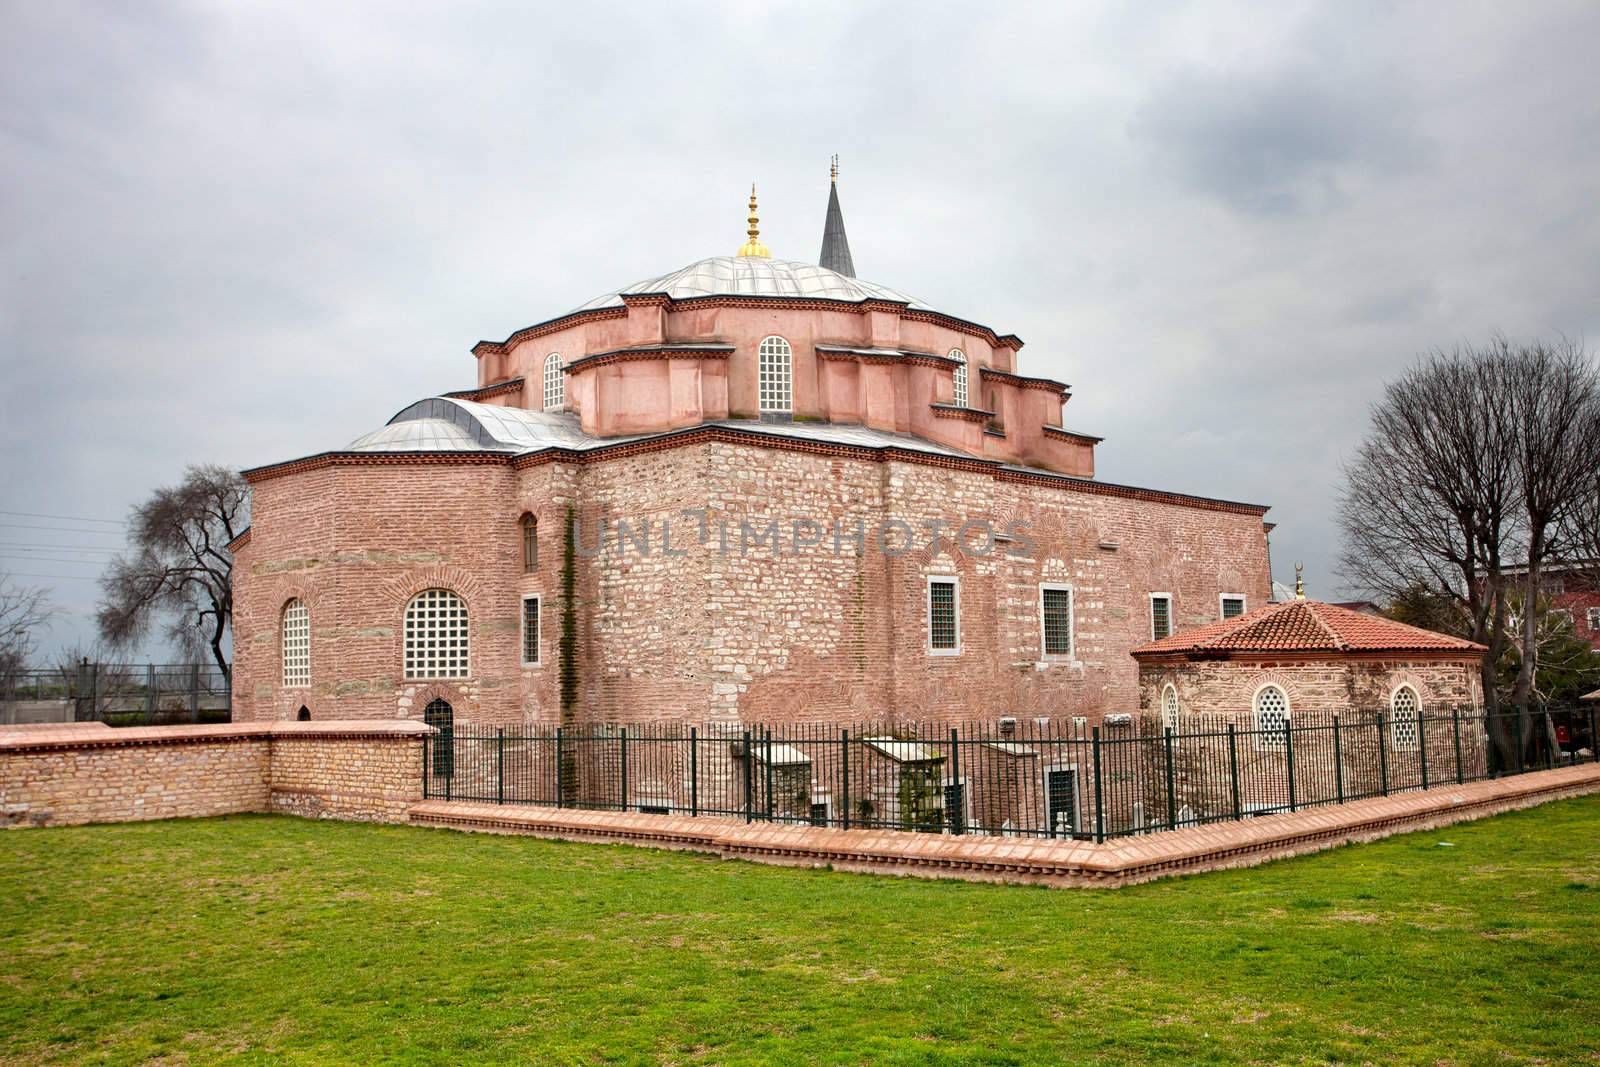 Little Hagia Sophia in Istanbul, Turkey. Formerly it was the Eastern Orthodox Church of the Saints Sergius and Bacchus, later converted into a mosque during the Ottoman Empire. This Byzantine building was a model for the Hagia Sophia, the main church of the Byzantine Empire